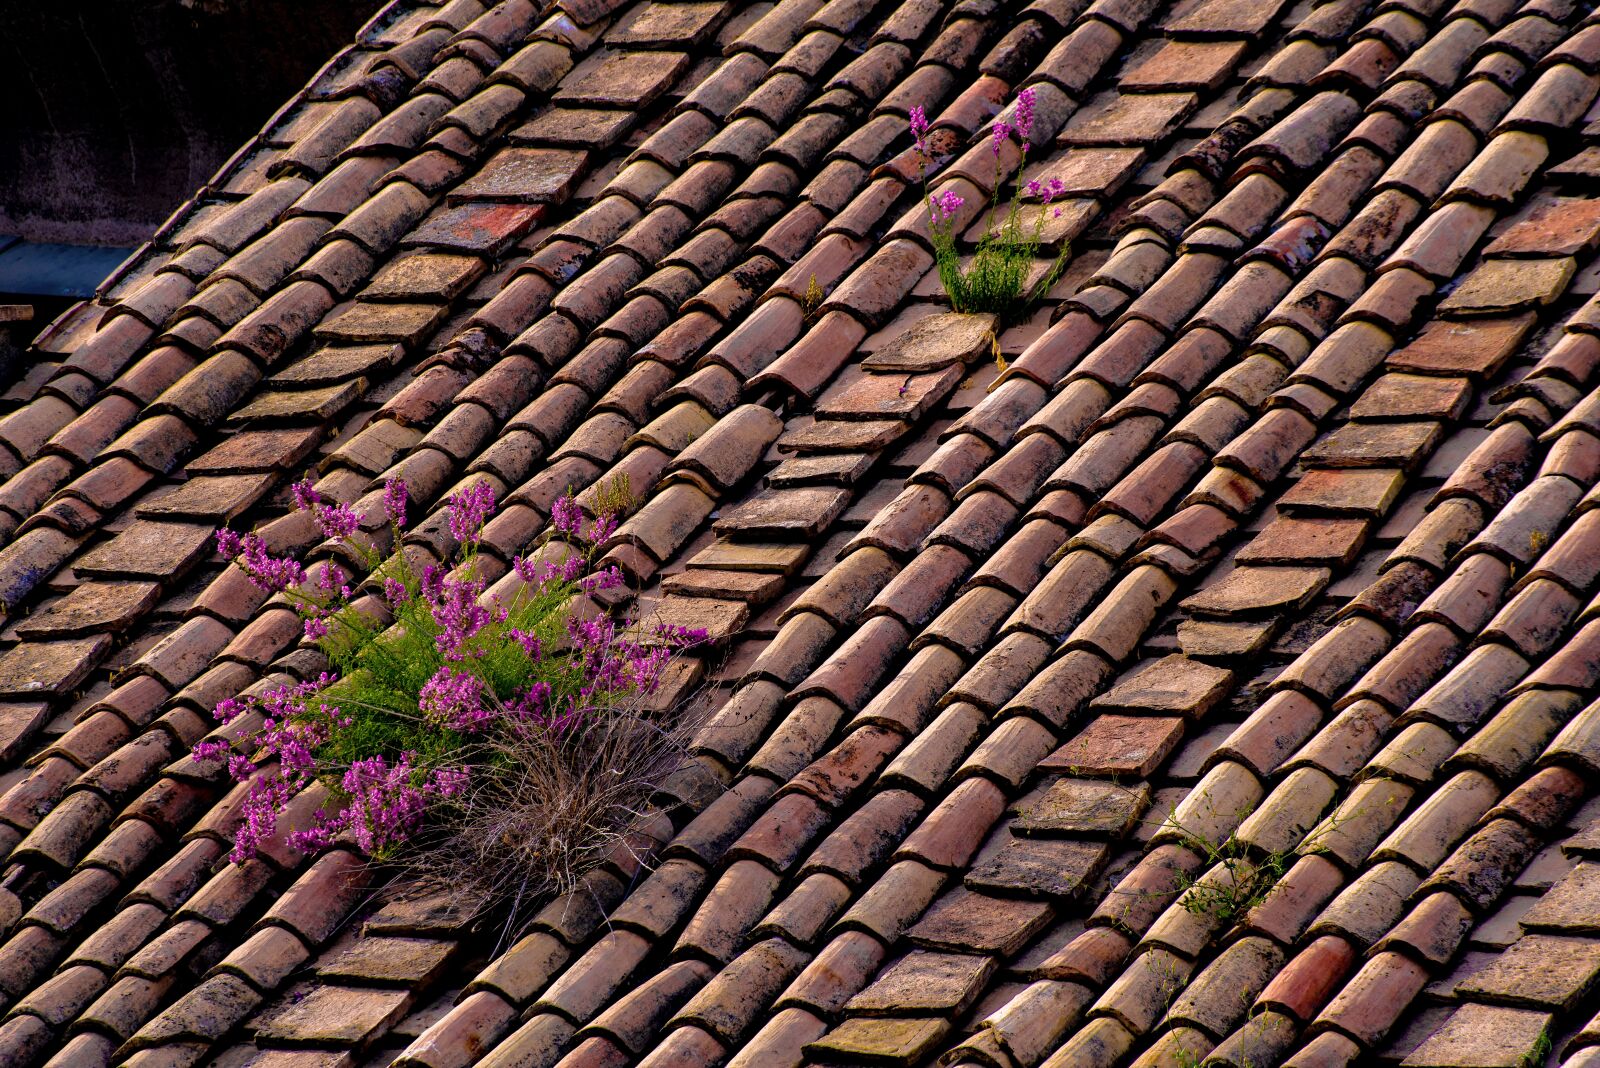 Pentax K-1 Mark II + Sigma sample photo. Roof, roofing, tiles photography